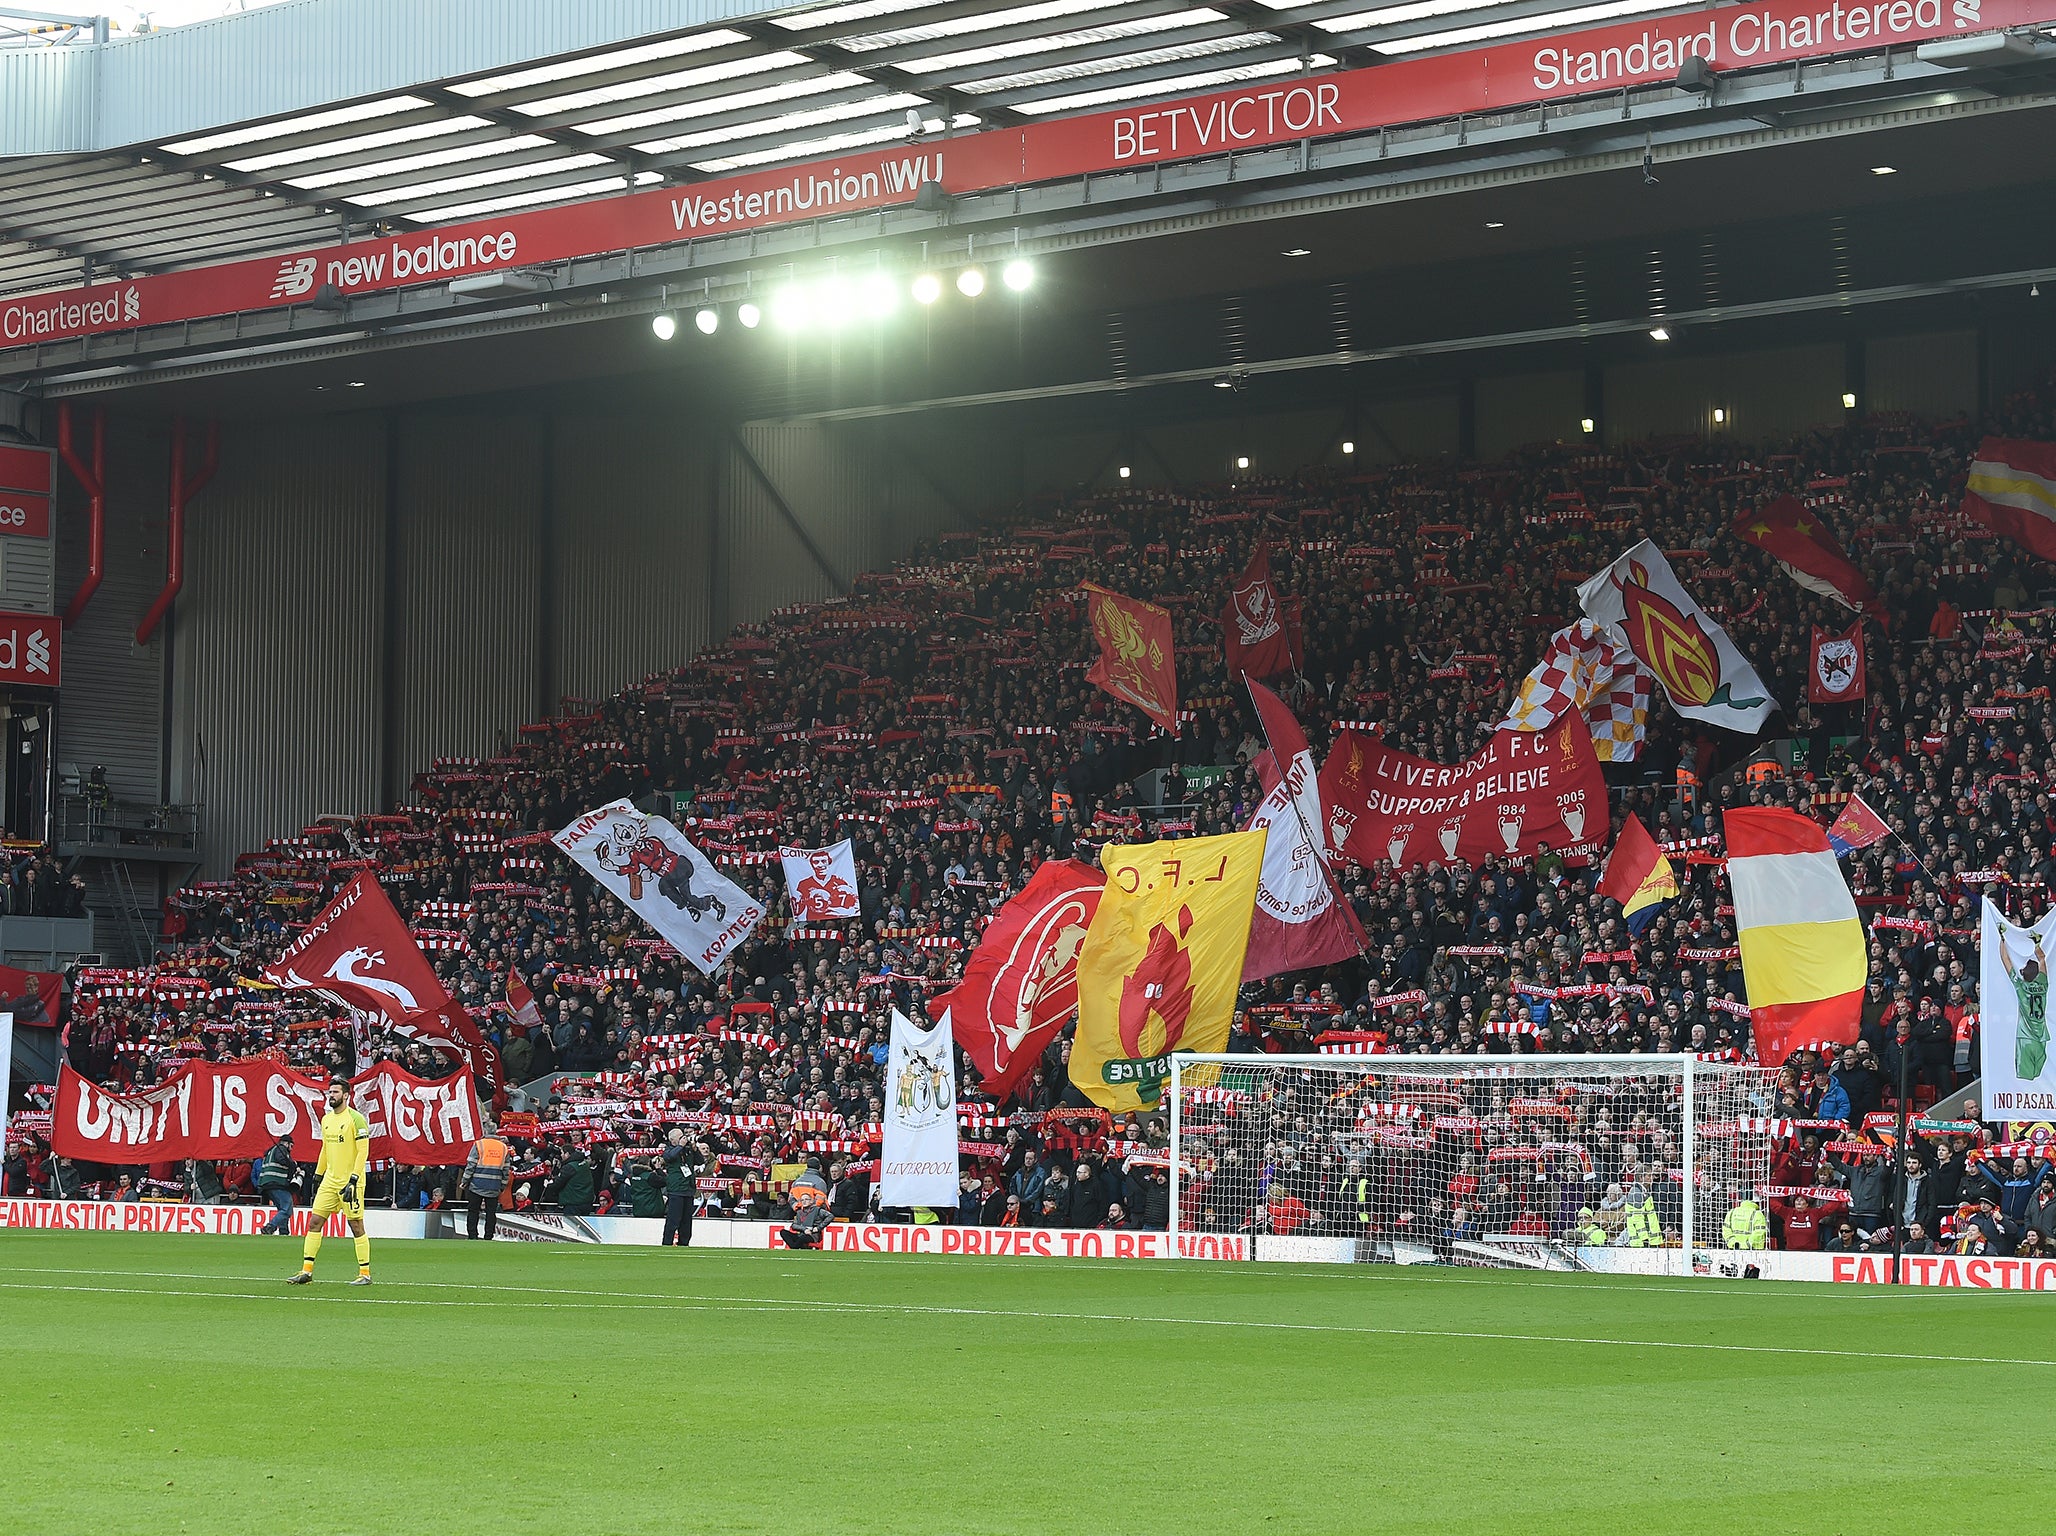 Anfield was in fine voice against Bournemouth